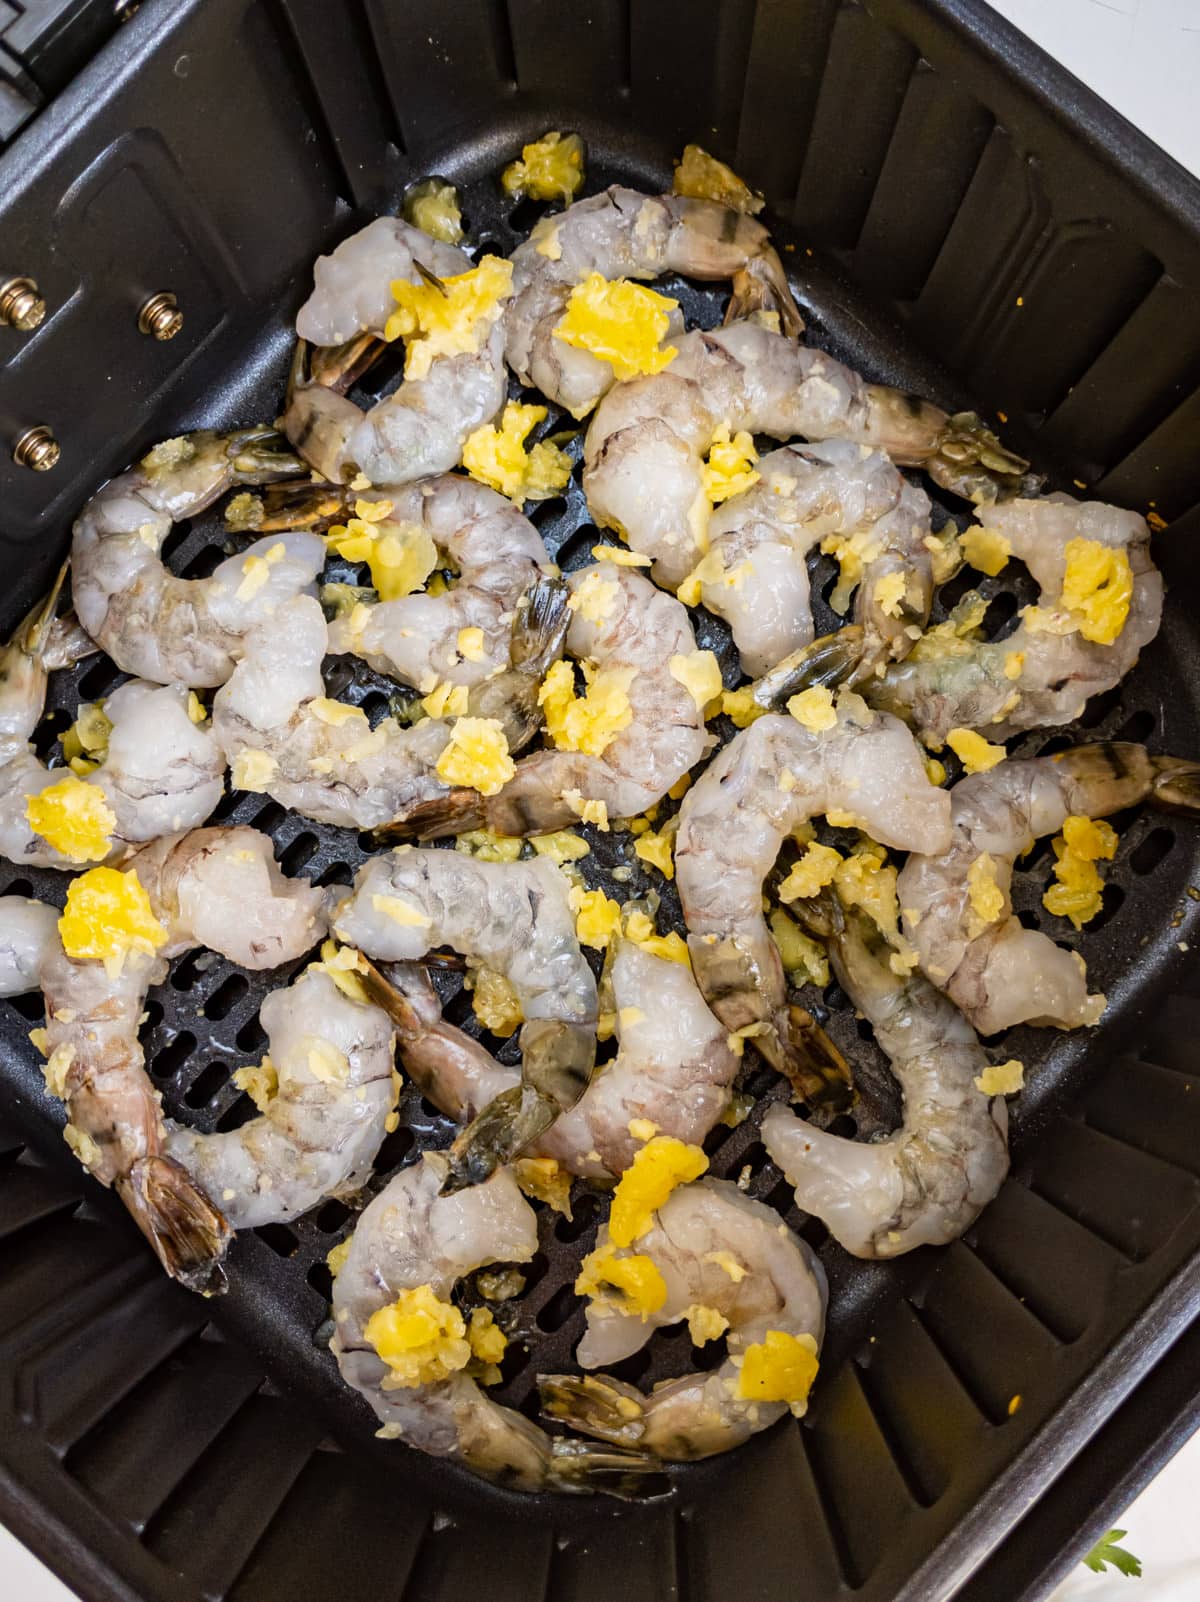 Top view of frozen shrimps with butter and garlic in an air fryer basket.